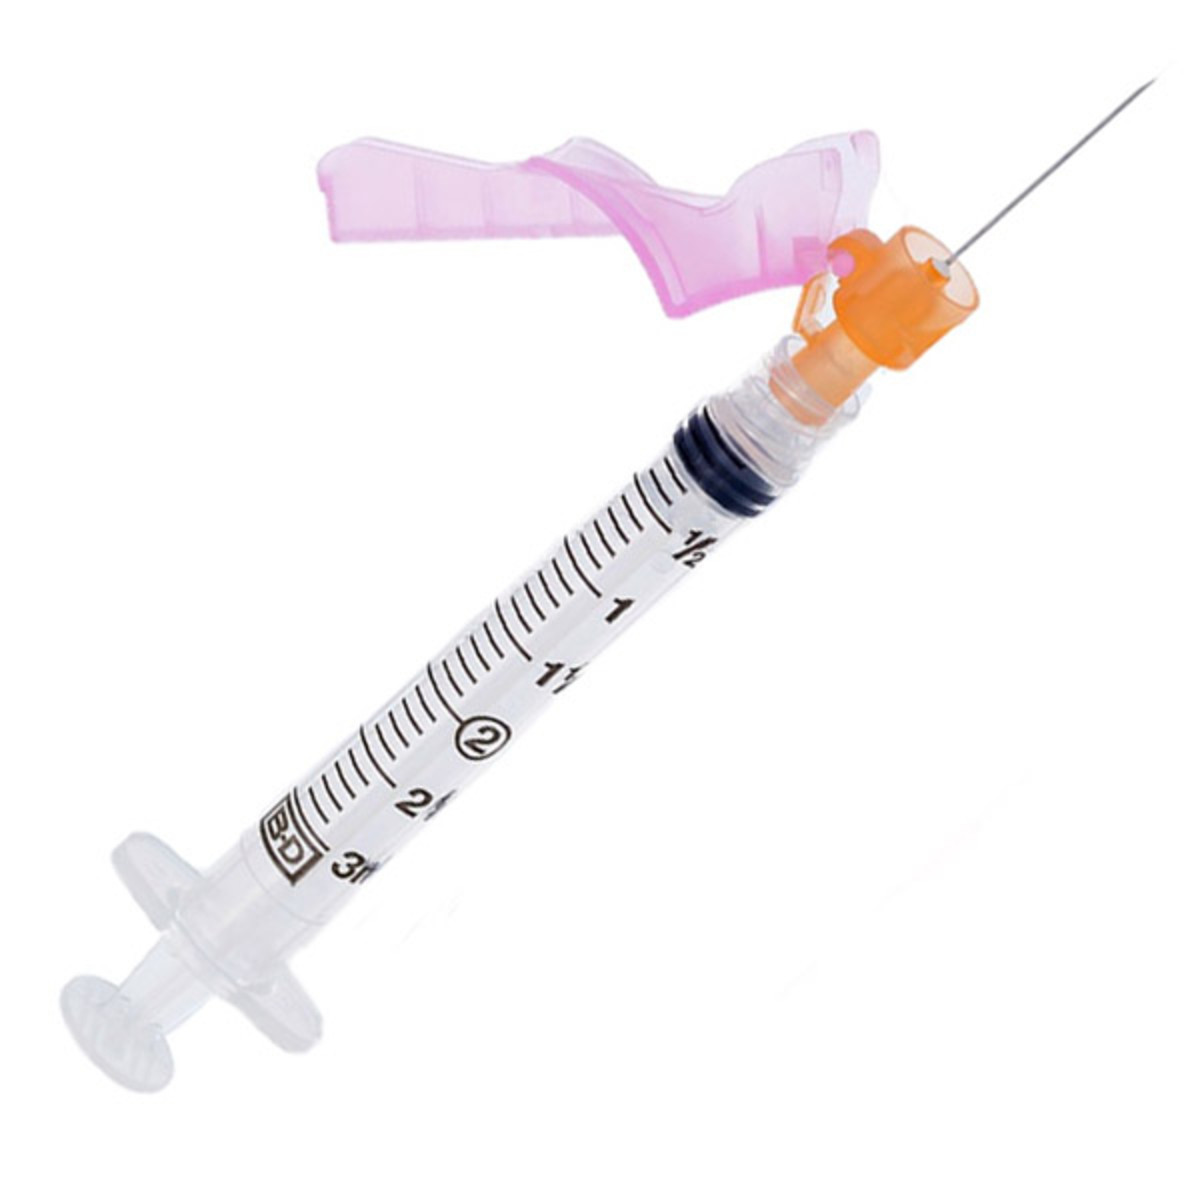 Bd 305780 Luer-lok Syringe With Bd Eclipse Safety 1ml 25g X 5/8″ 50 Per Box Needles and Syringes (IM & SC)